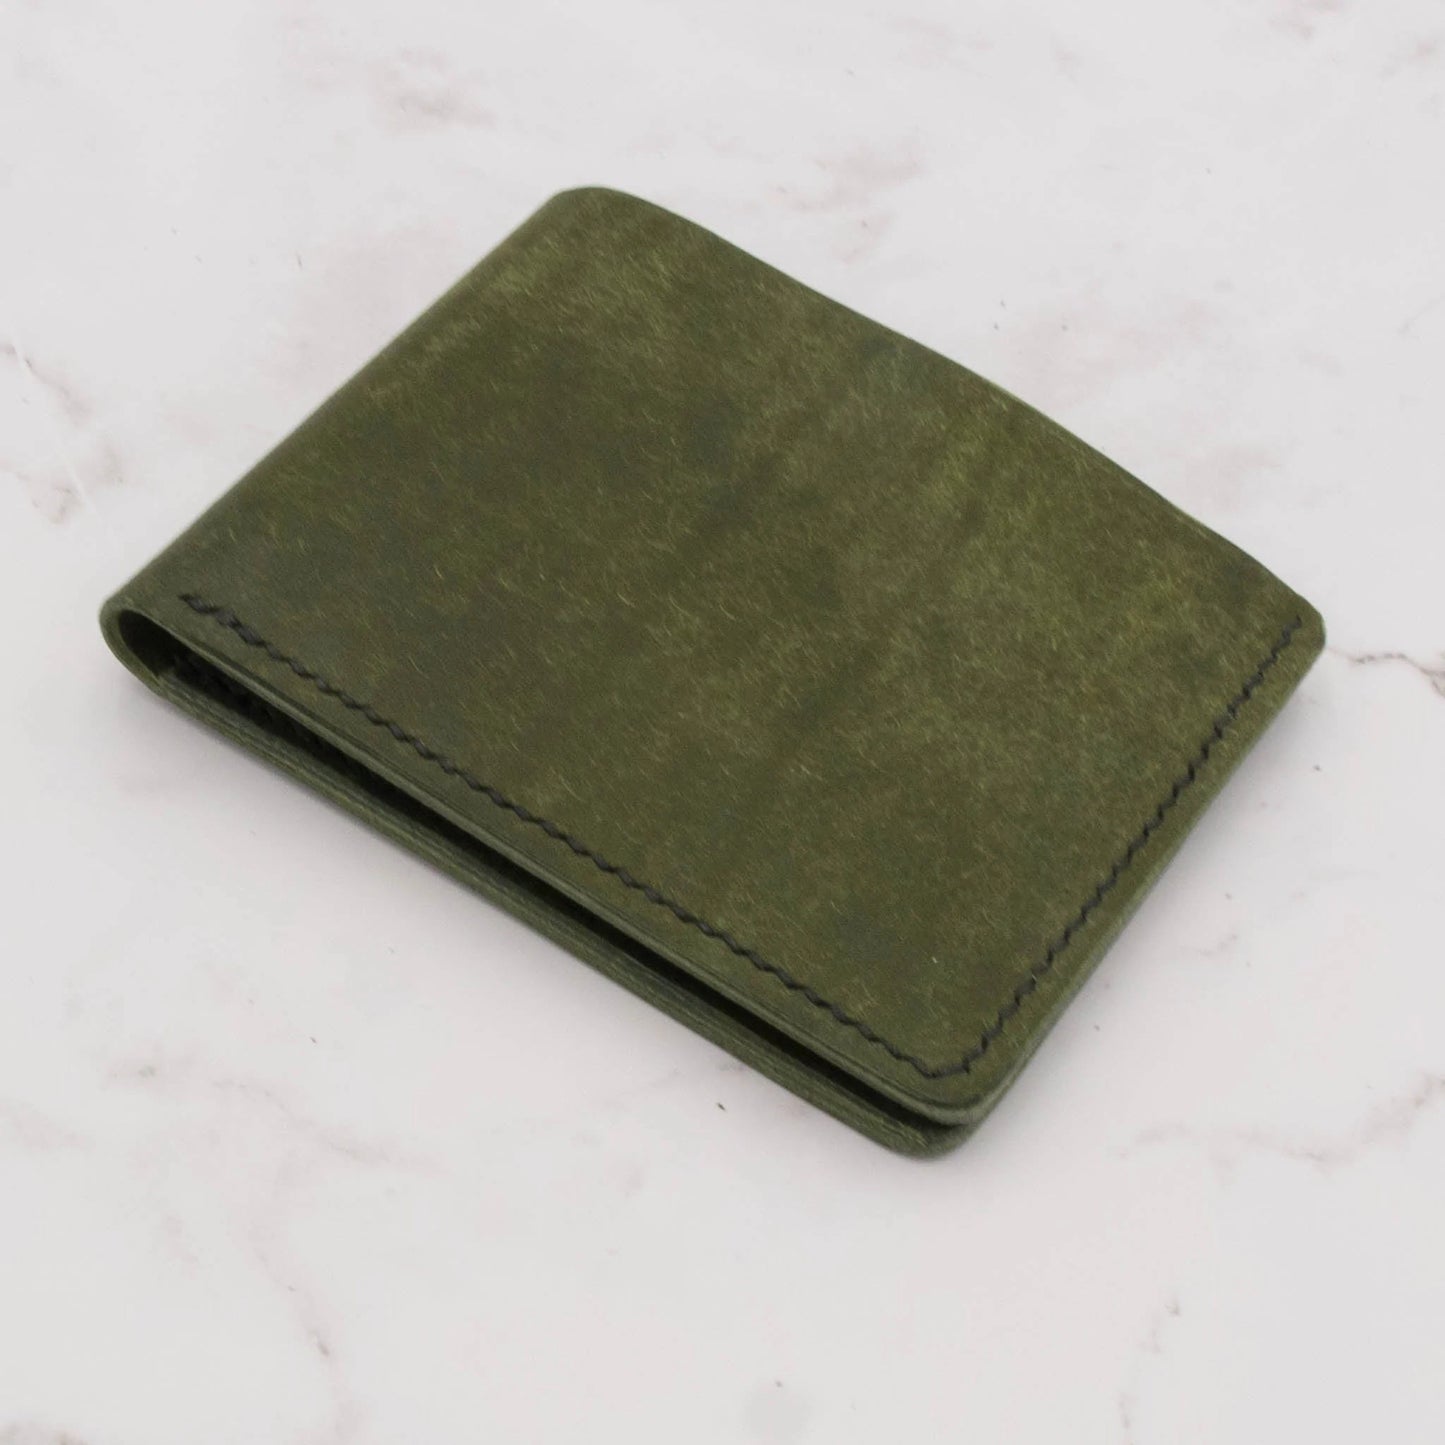 Arbor Trading Post Bifold Wallet Handcrafted Slim Classic Leather Bifold Wallet - Olive Green